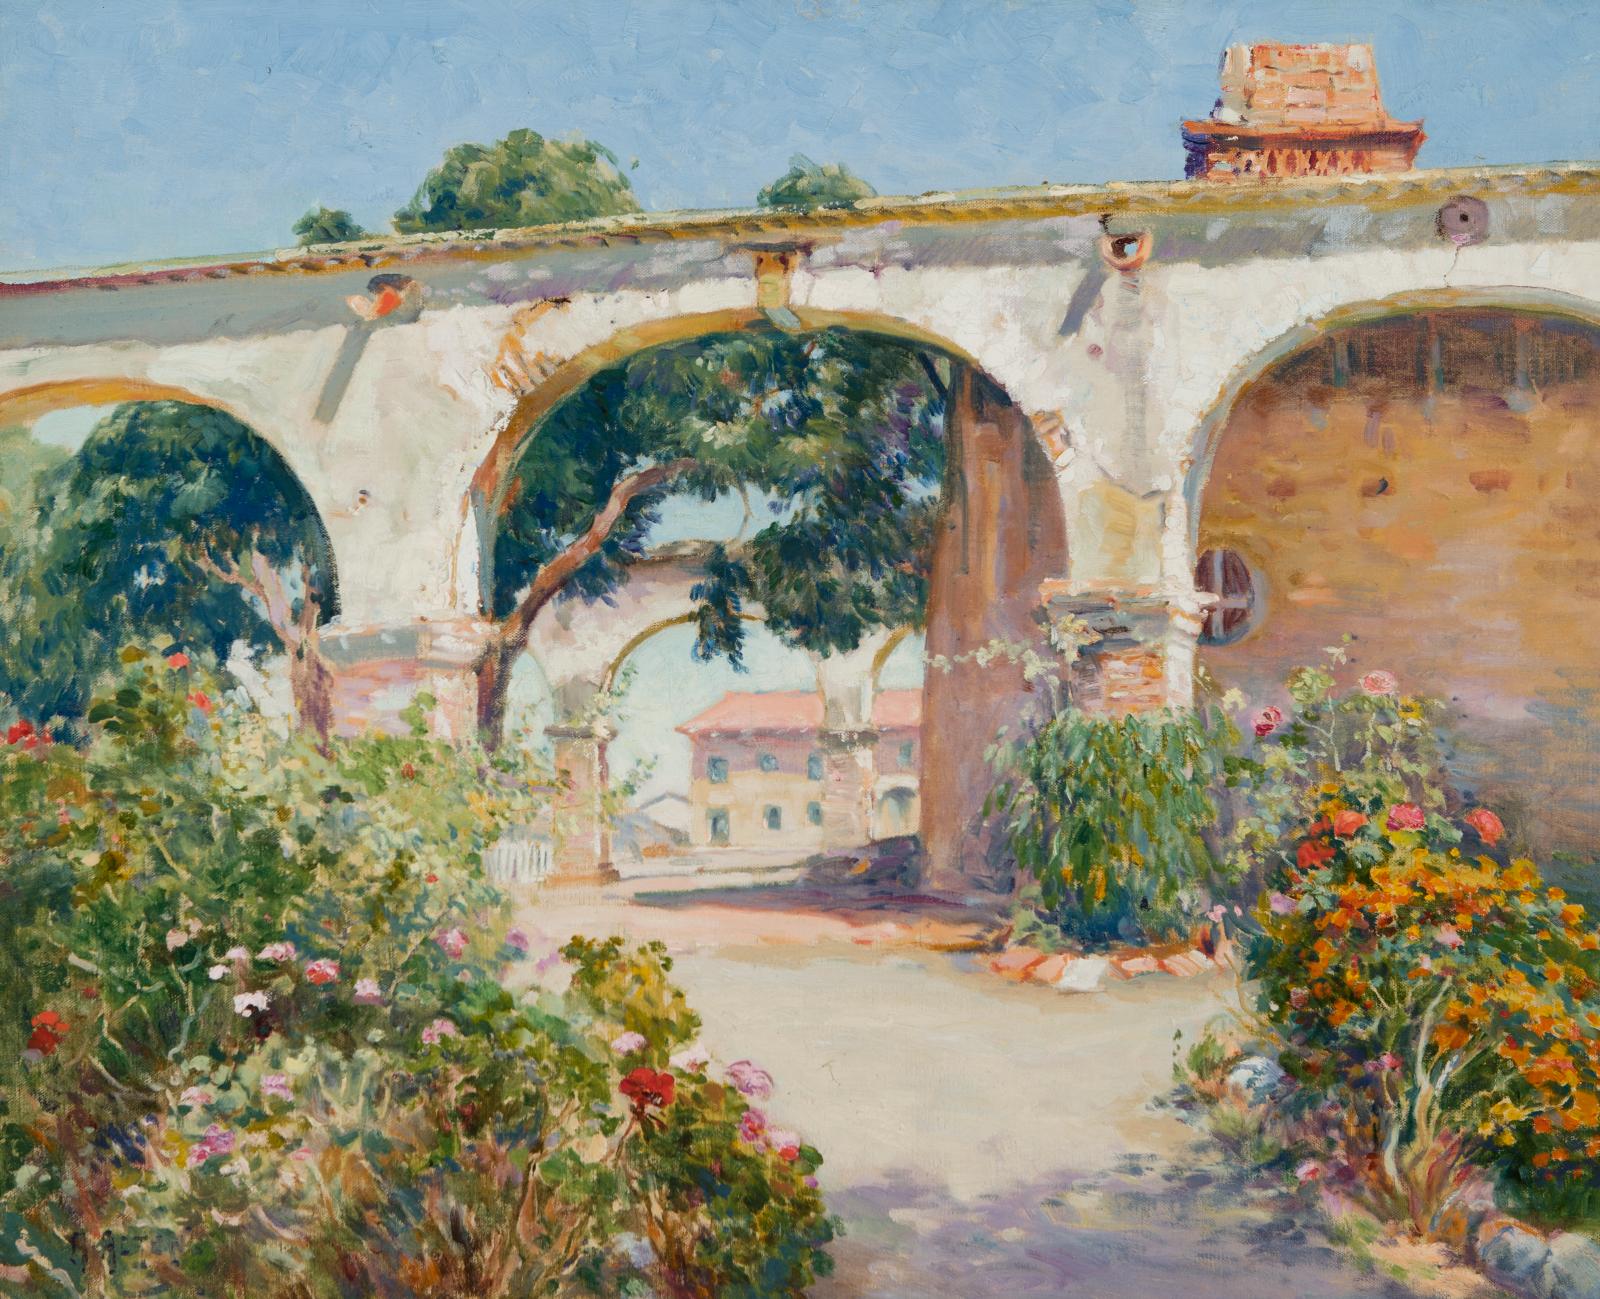 White arches with brick buildings behind them.